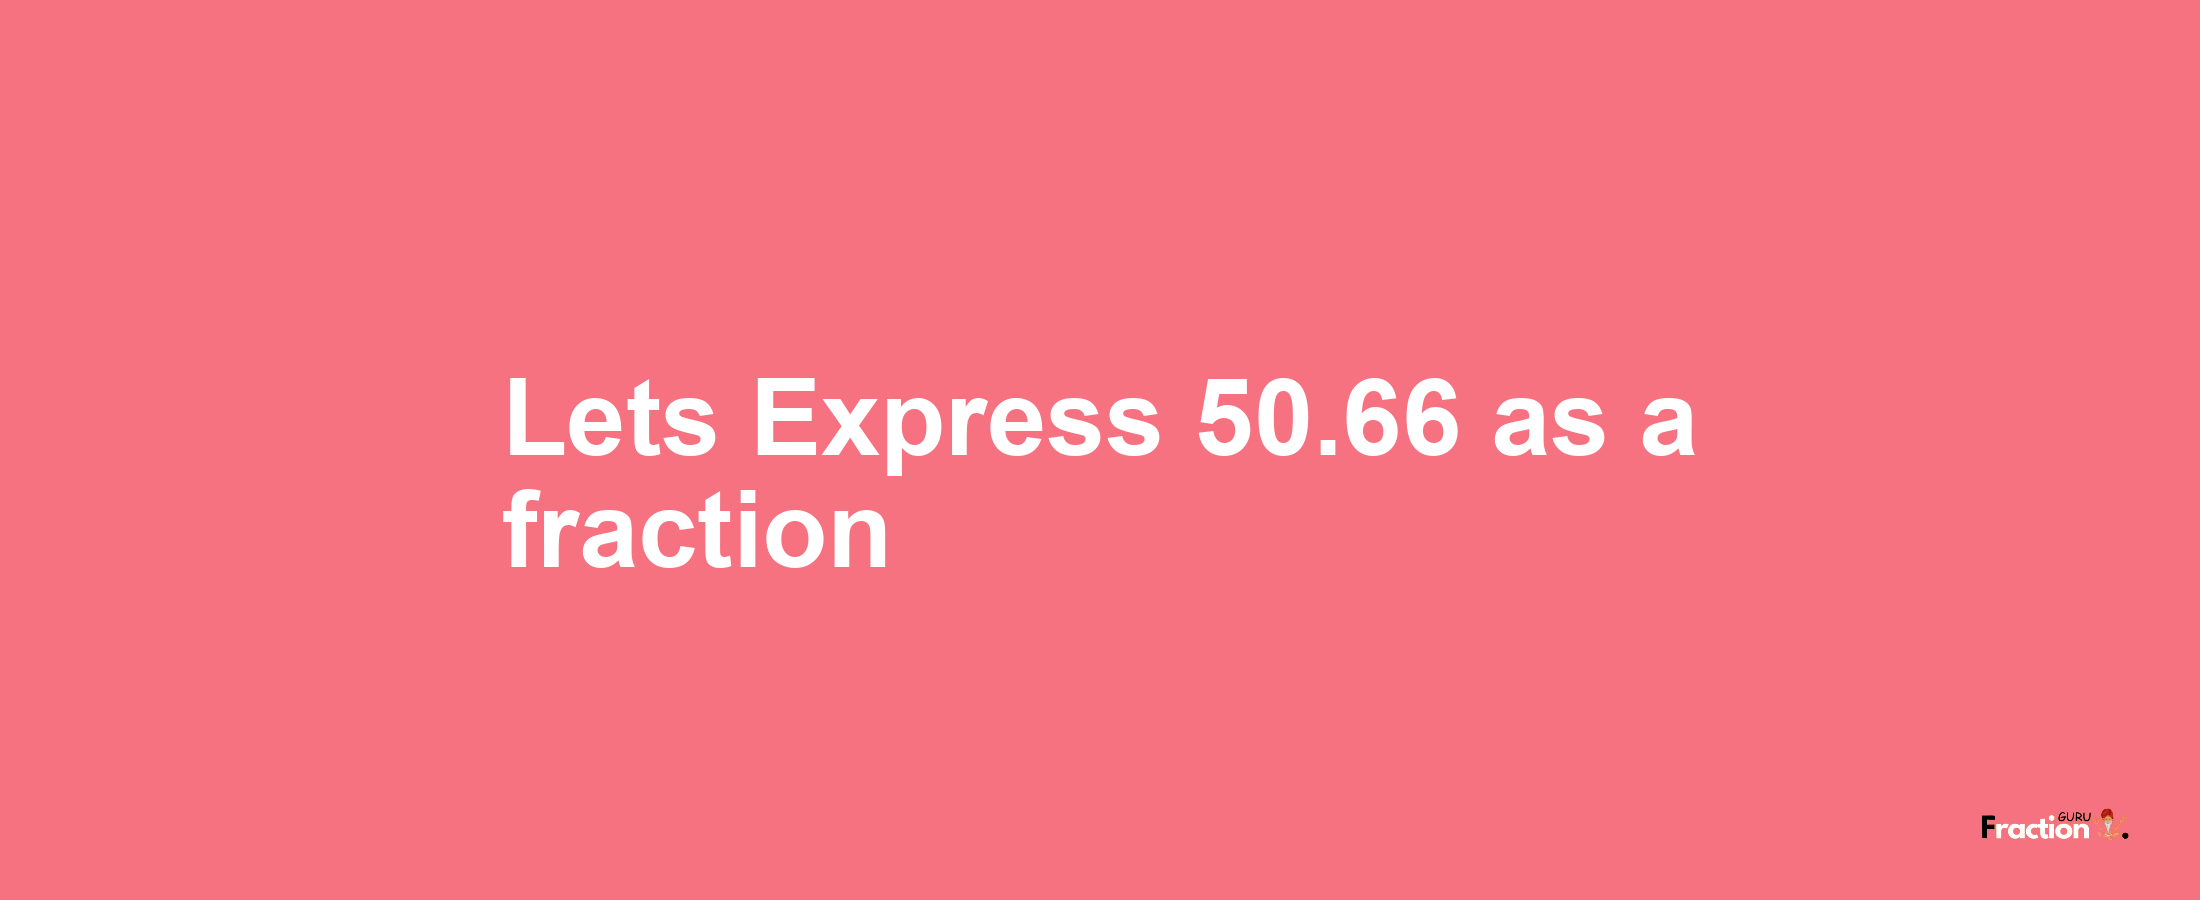 Lets Express 50.66 as afraction